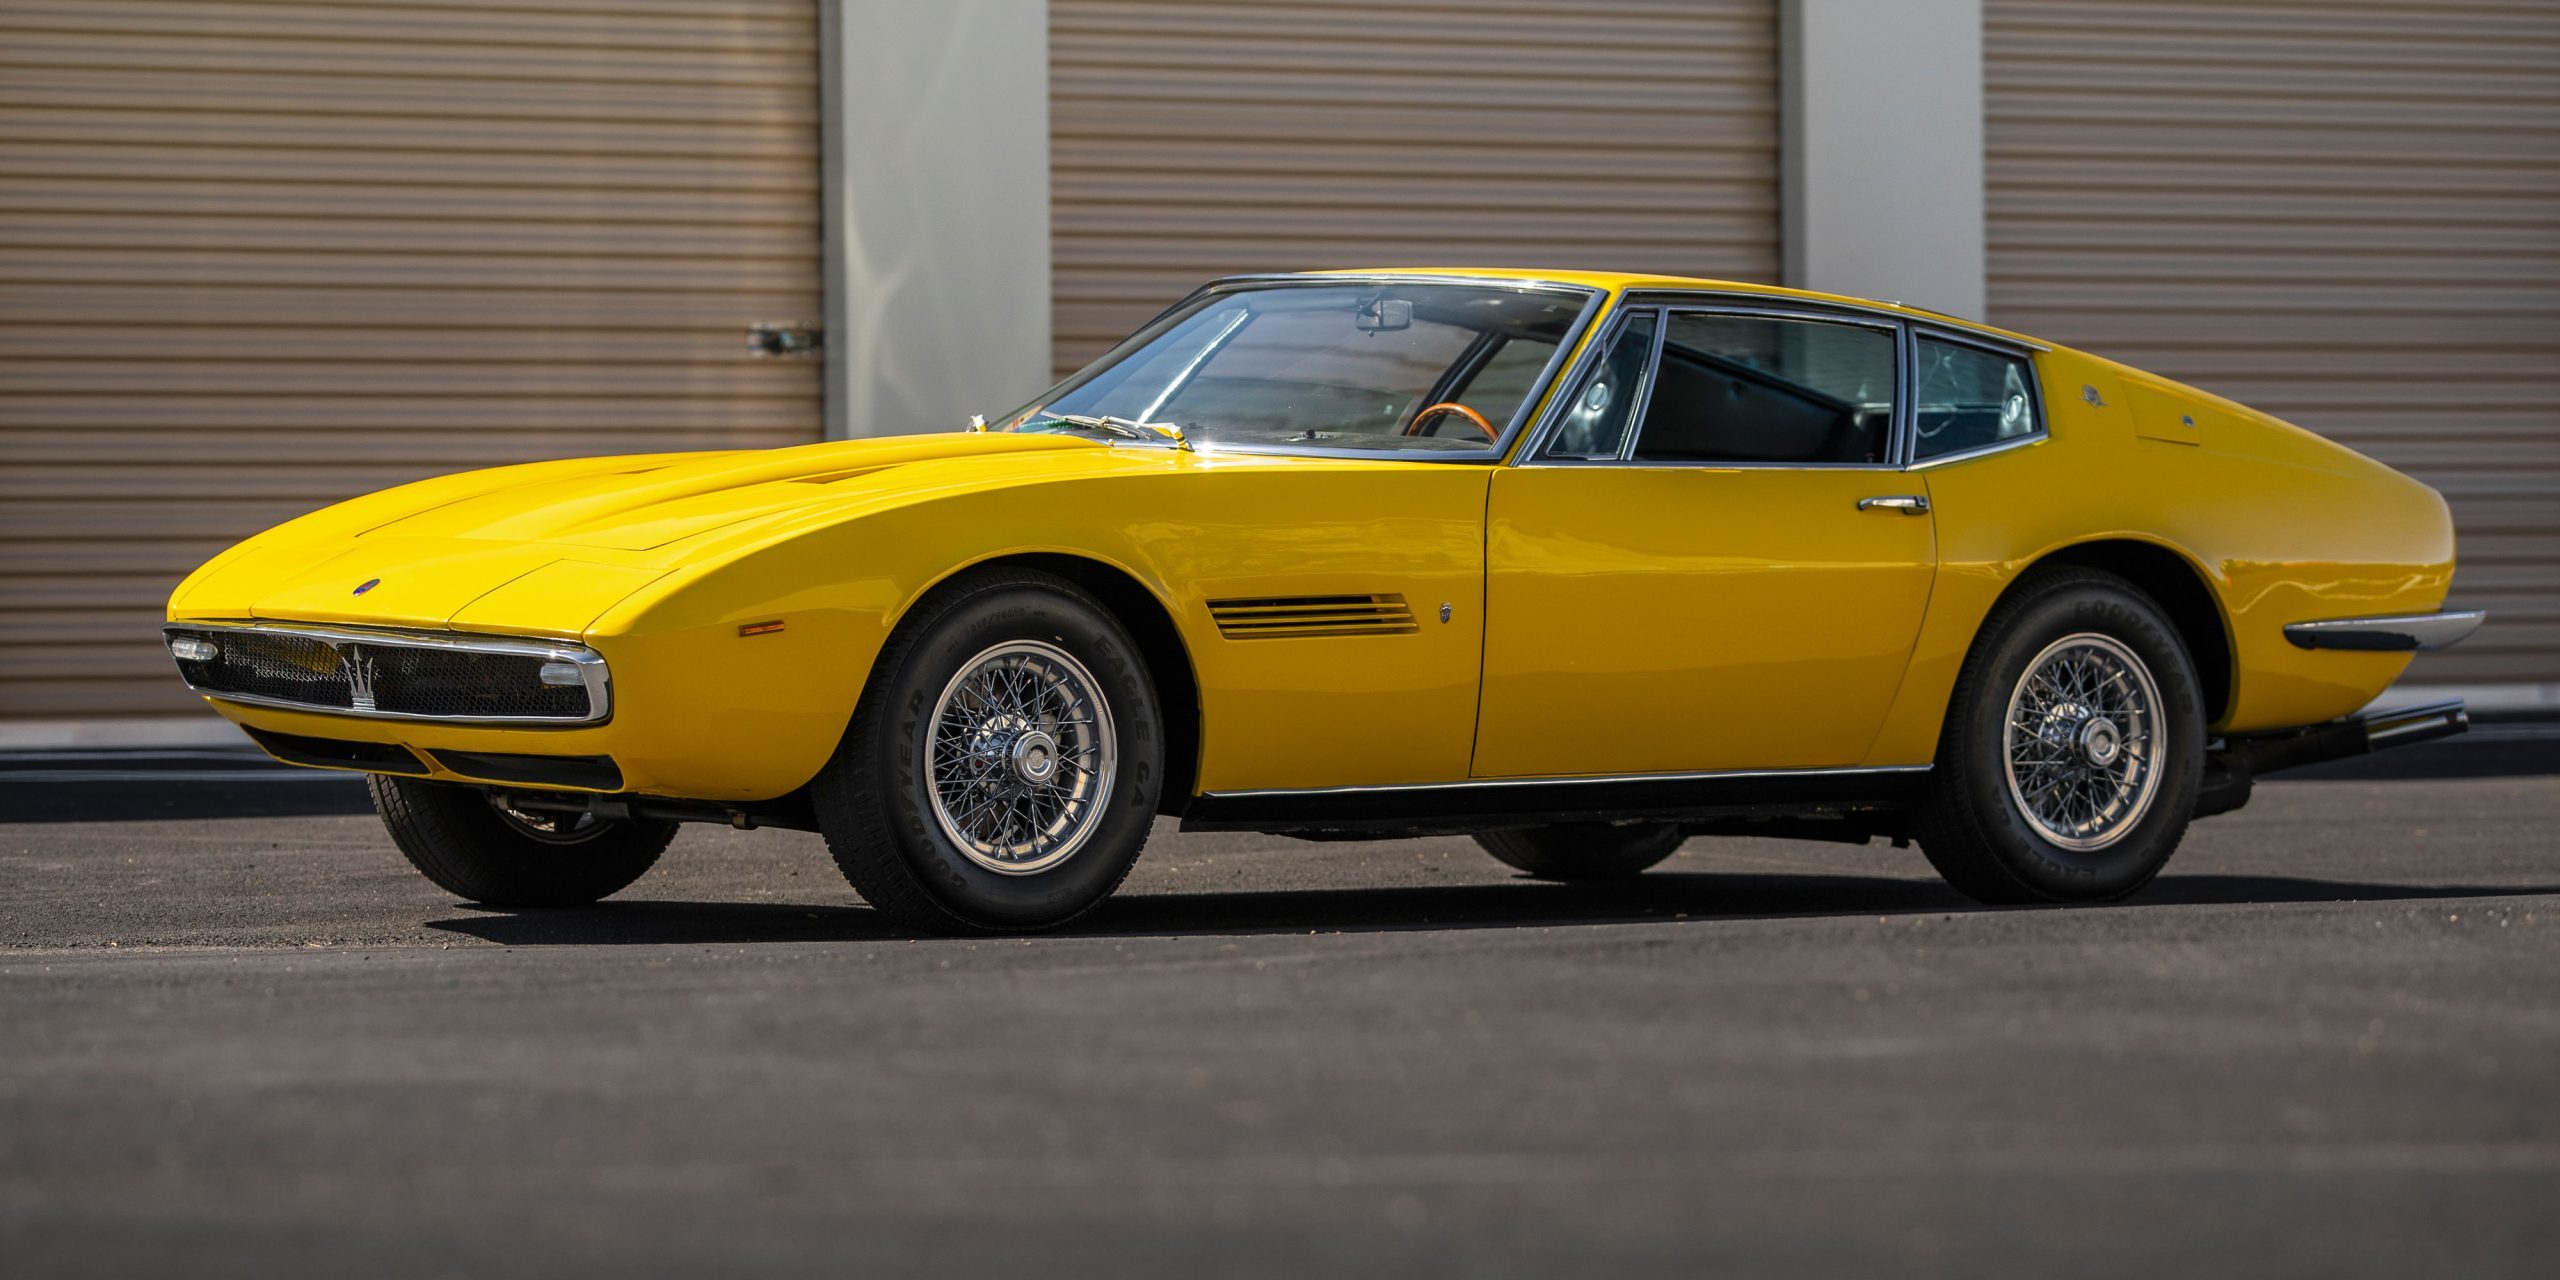 1967 Maserati Ghibli 4.7 Coupe by Ghia Patrick Ernzen ©2021 Courtesy of RM Sotheby's